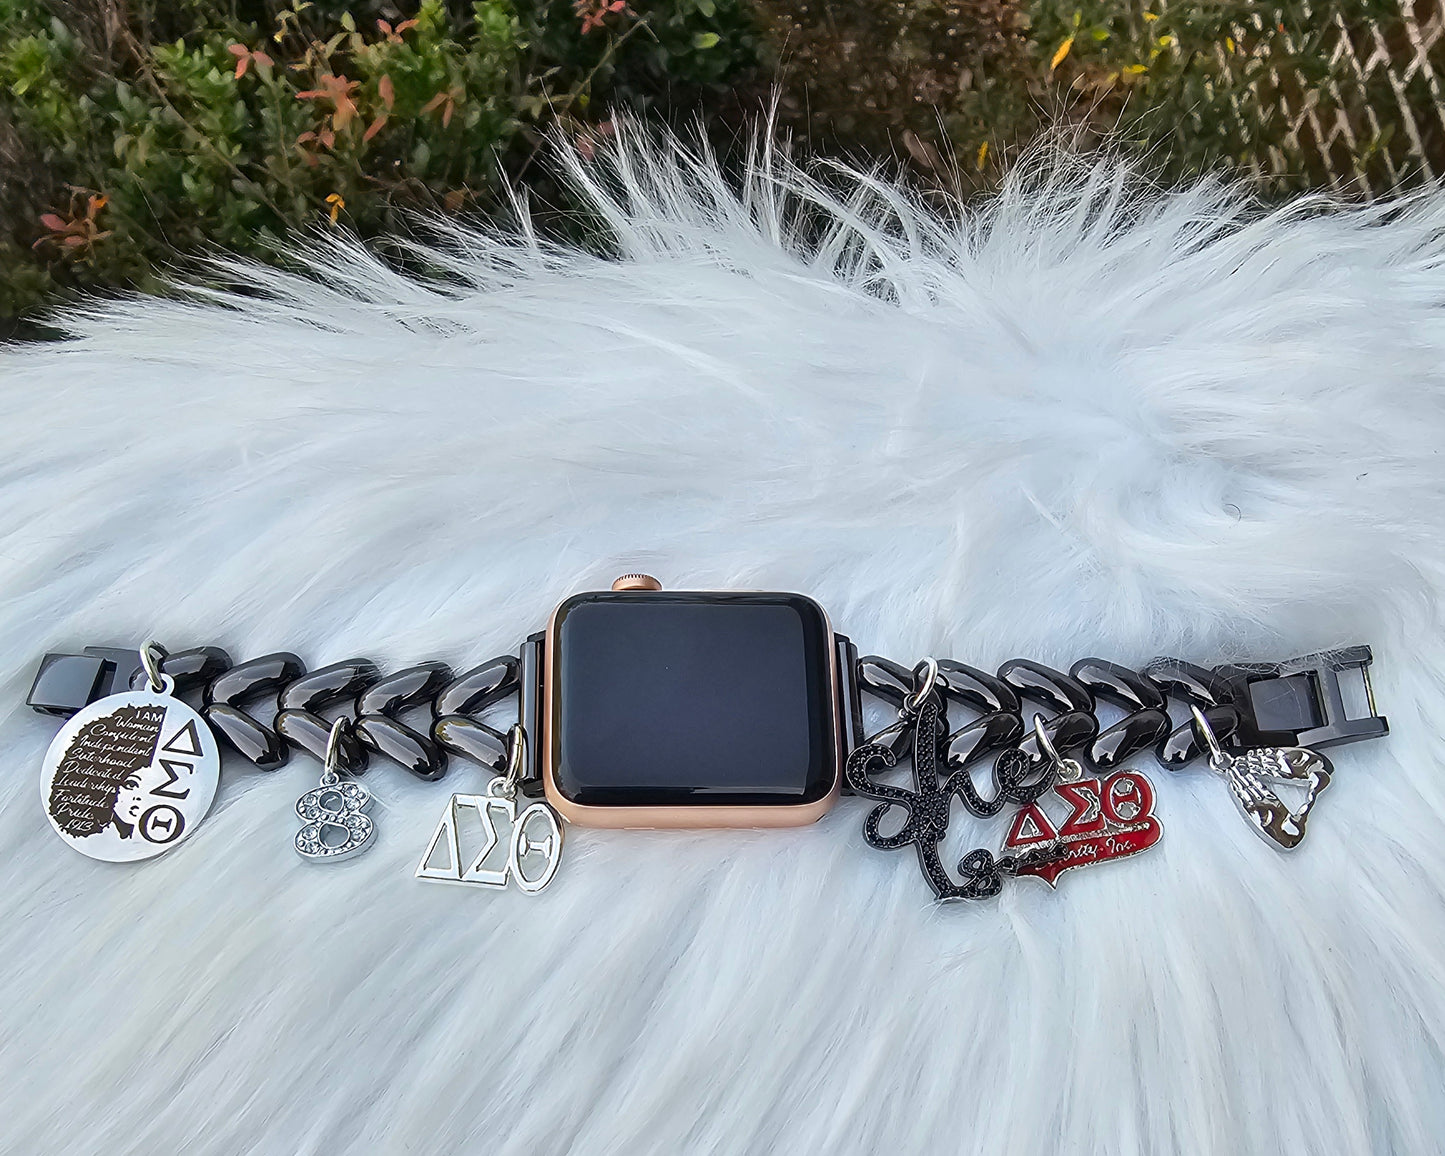 Delta Sigma Theta Custom Fit Sorority Apple Link Watch Band (charms may be changed at customers request)